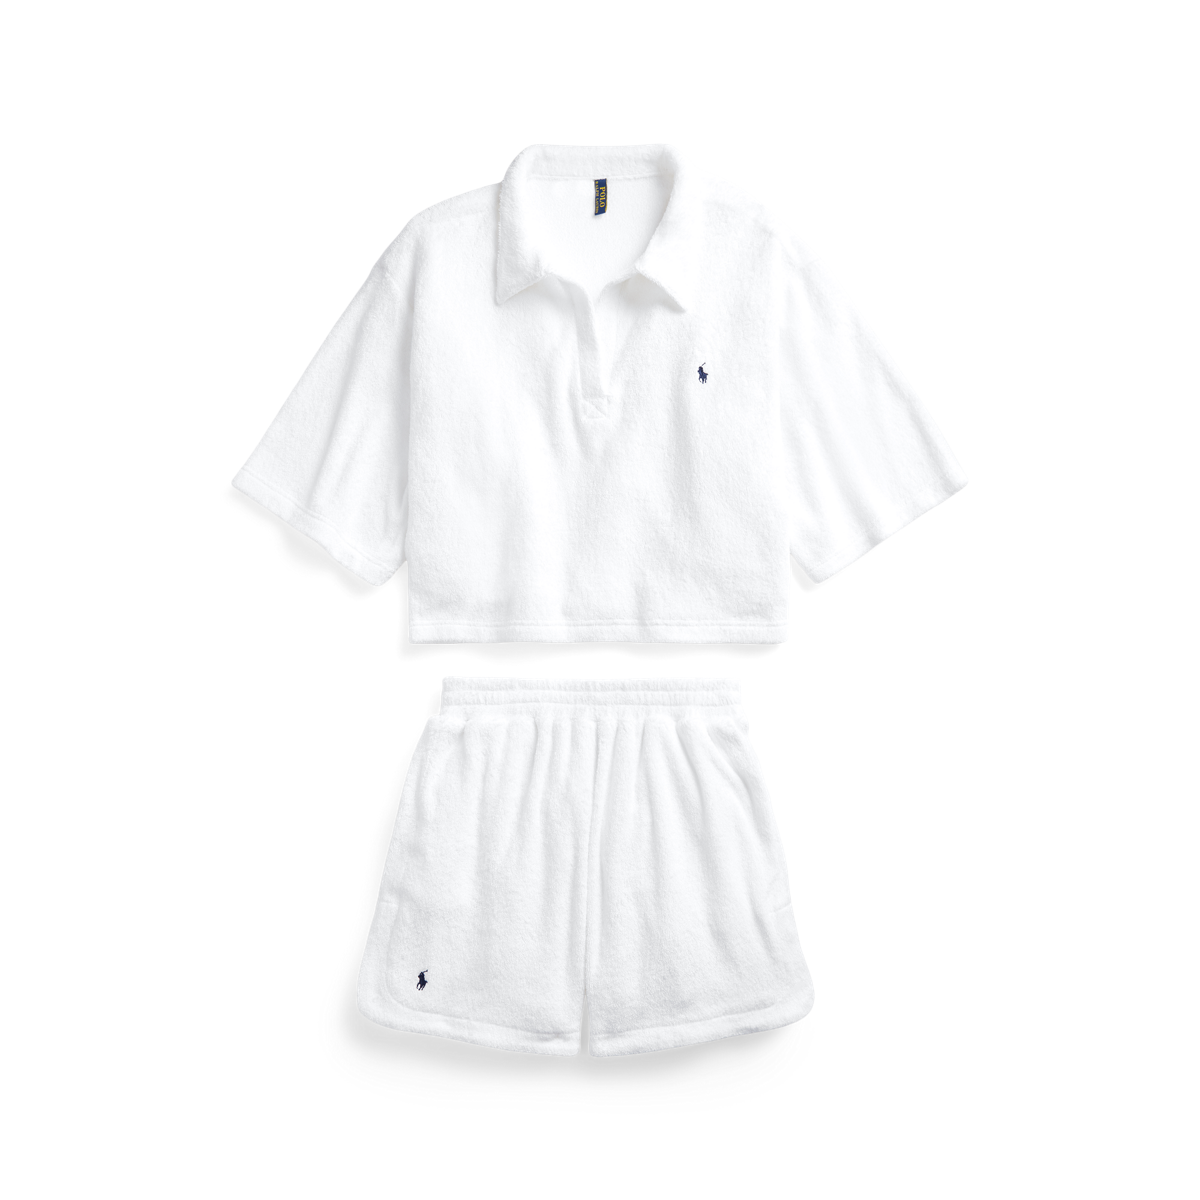 Terry Polo Shirt & Short Cover-Up Set